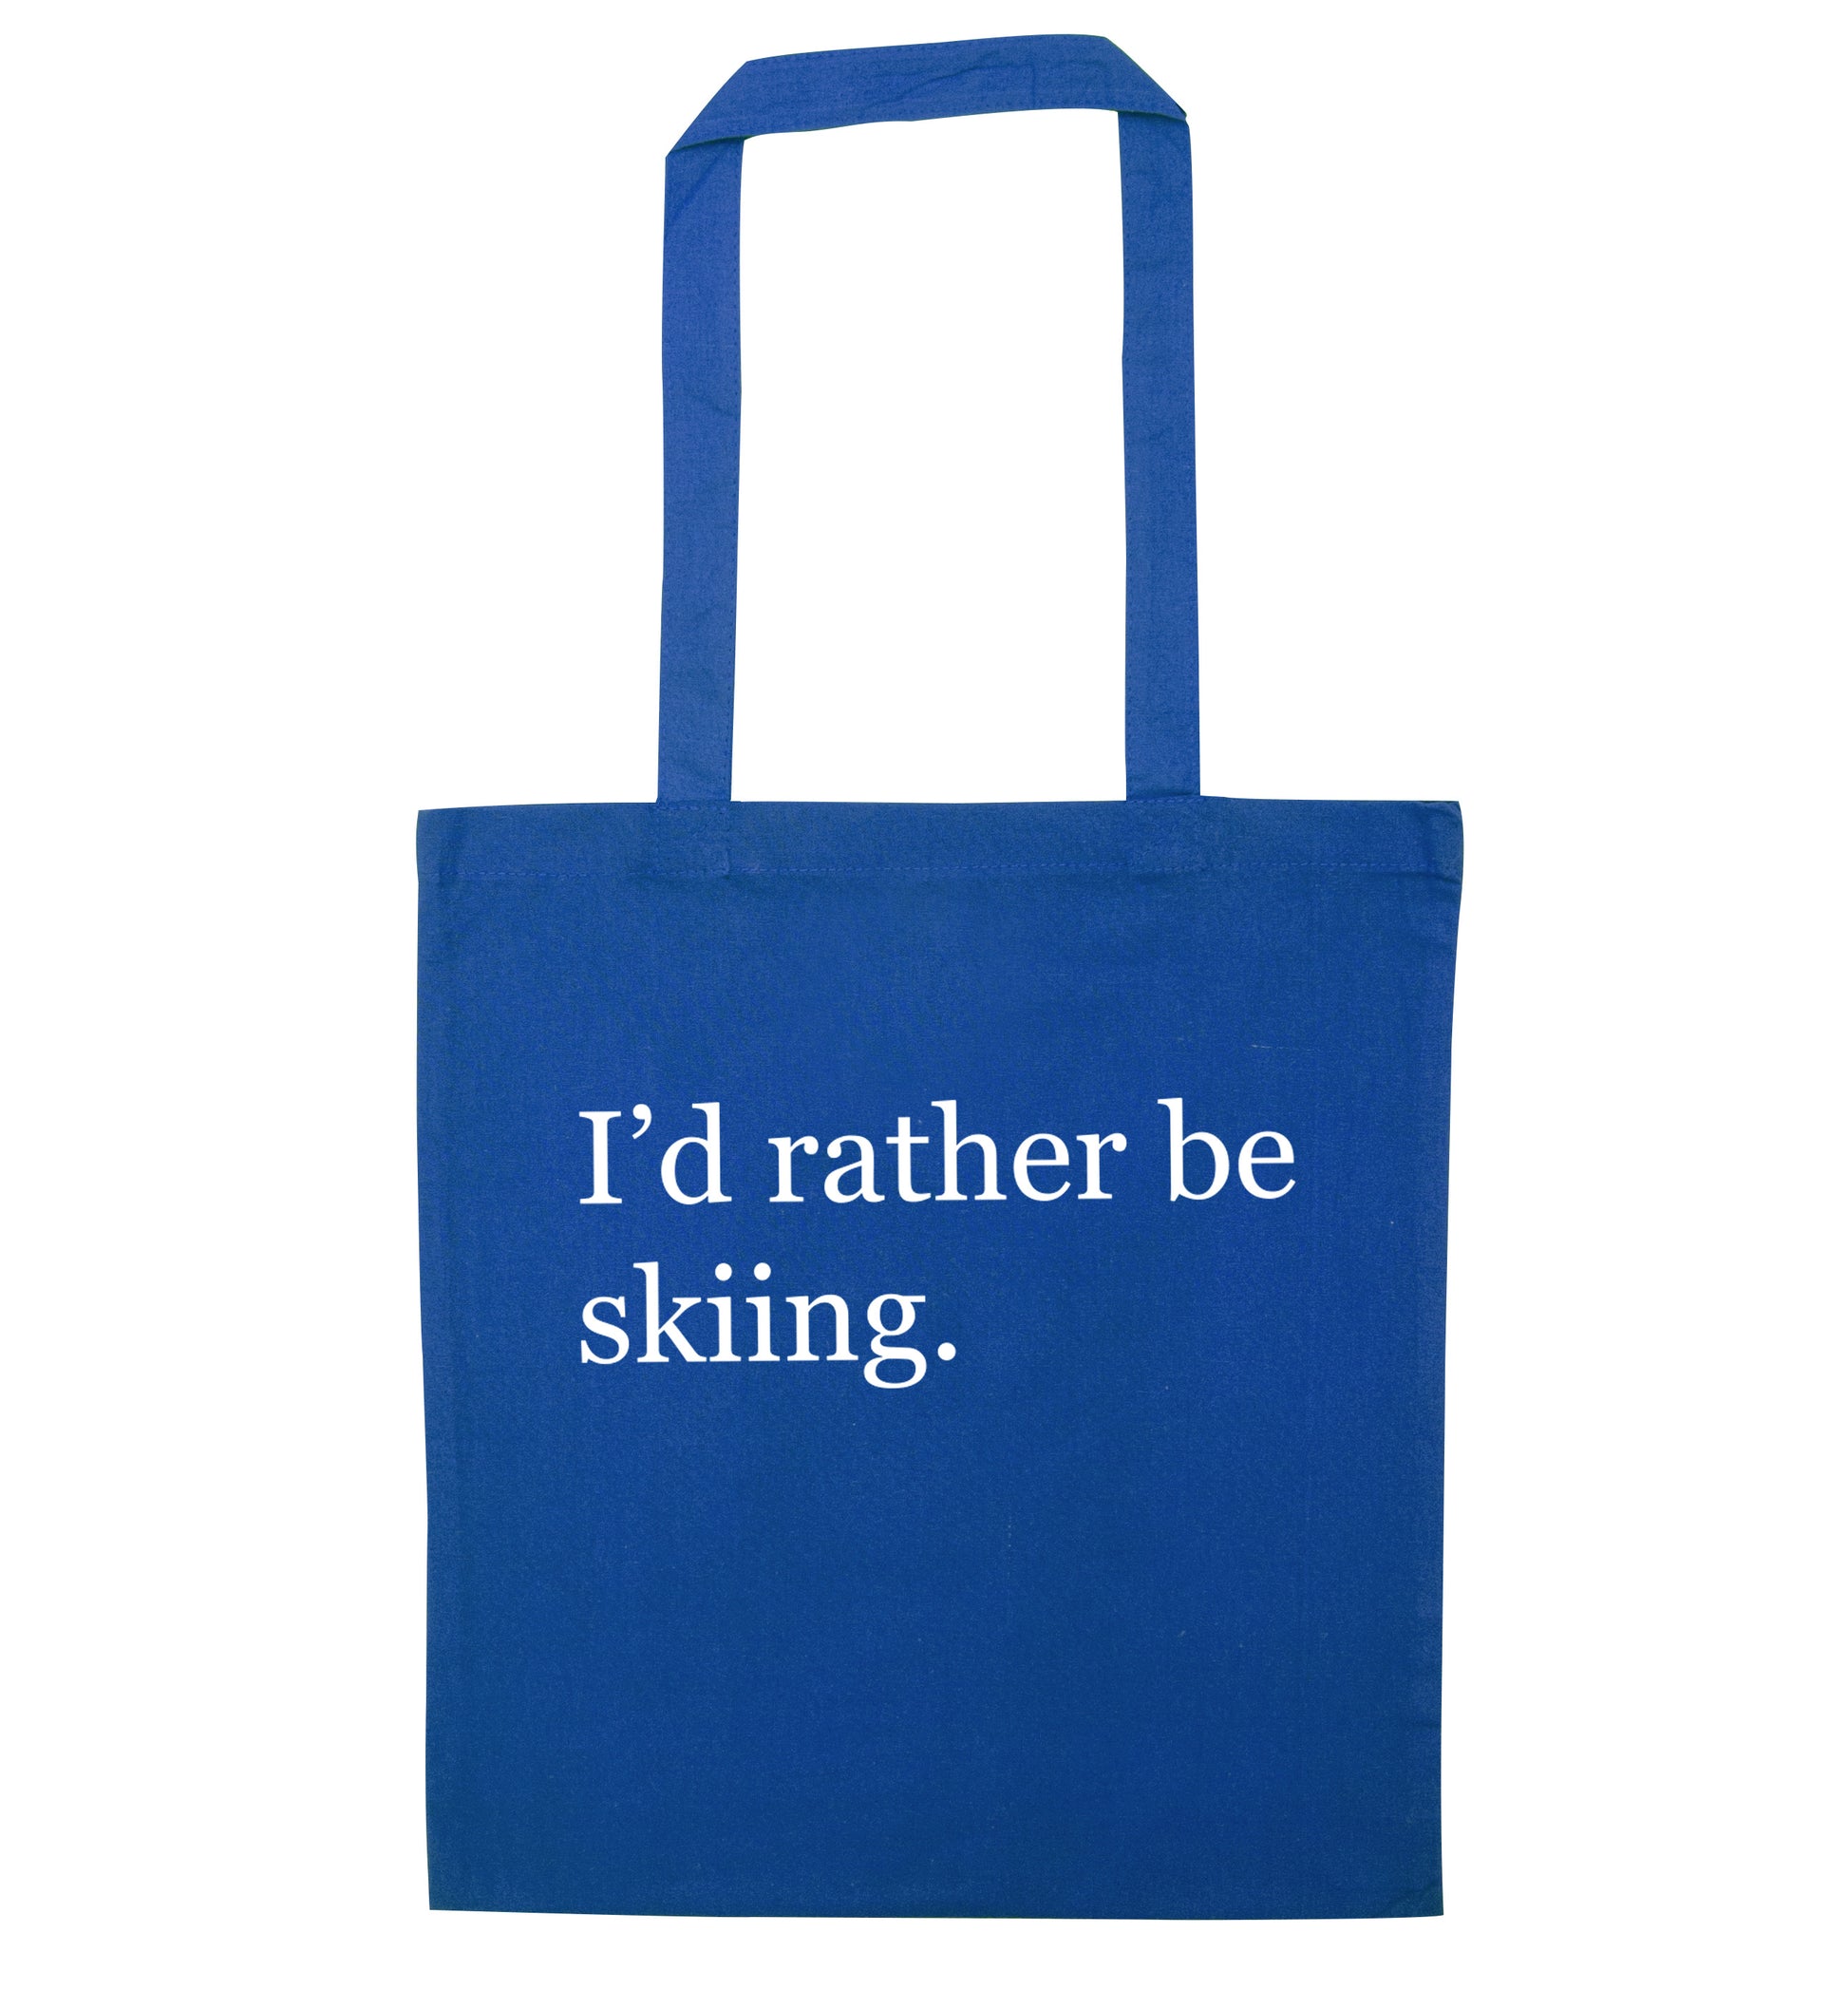 I'd rather be skiing blue tote bag